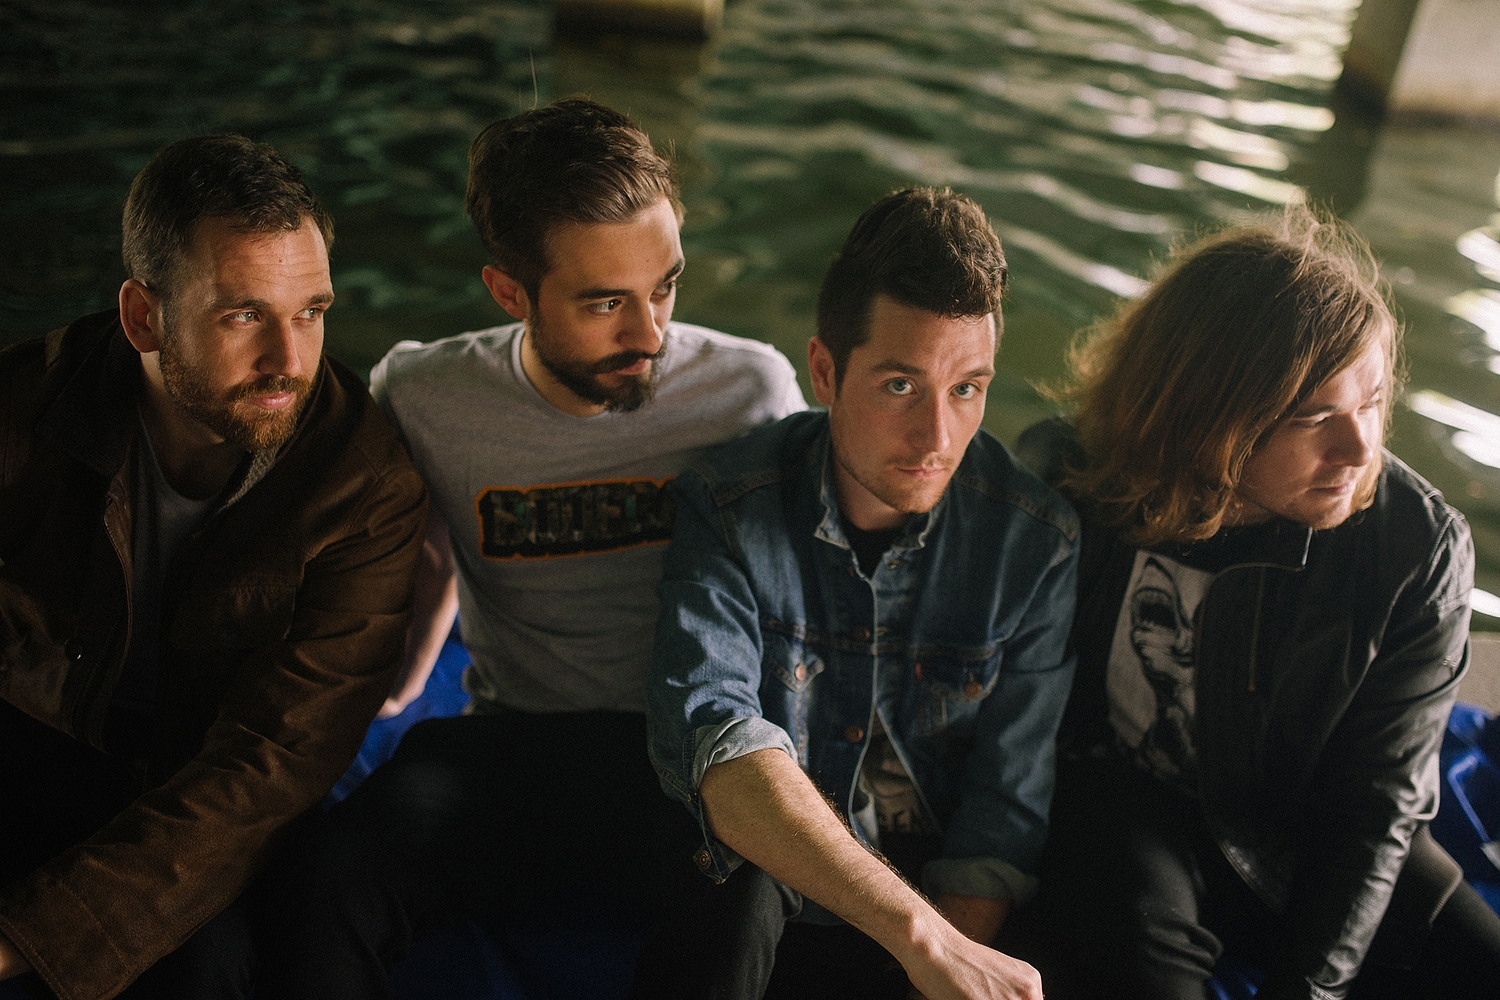 Bastille’s Woody to drum at Plymouth Argyle football match